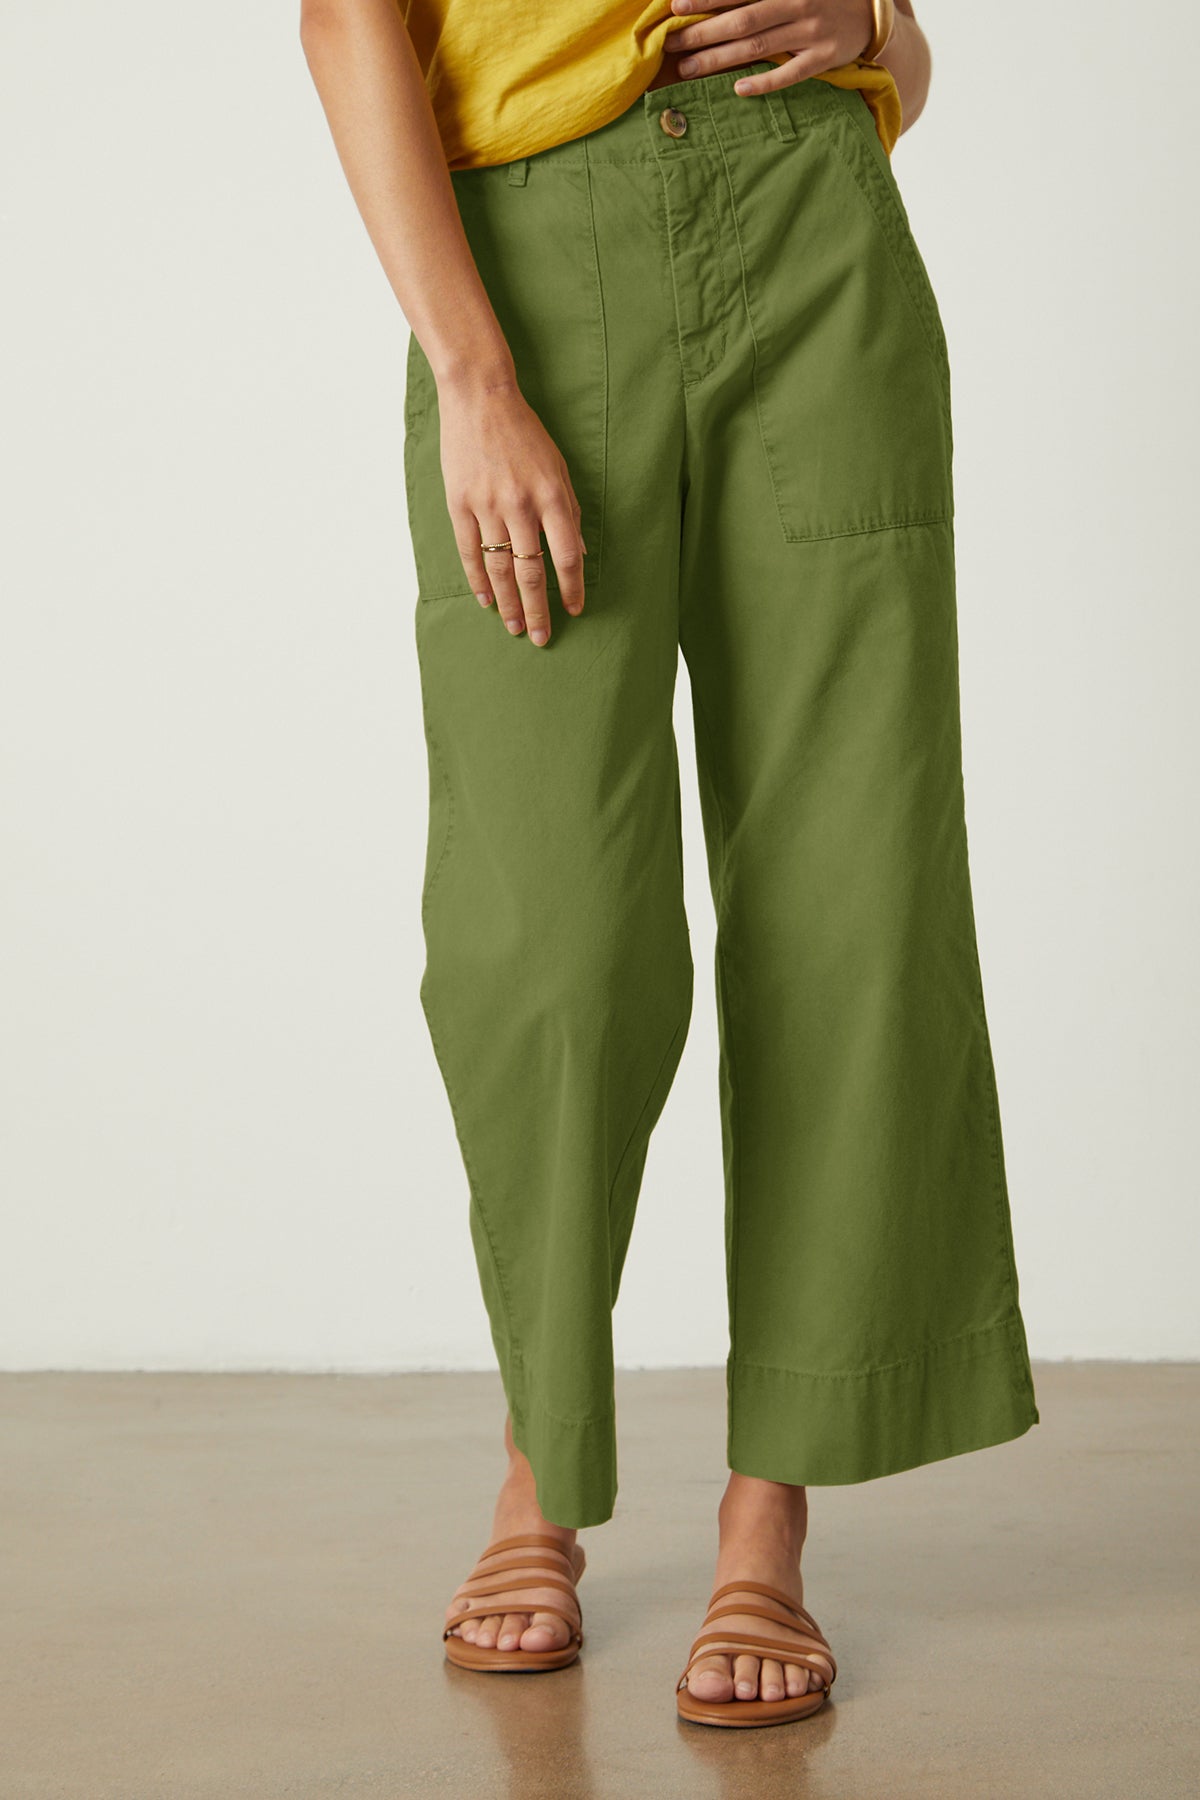   Mya Pant in soft army green color front 